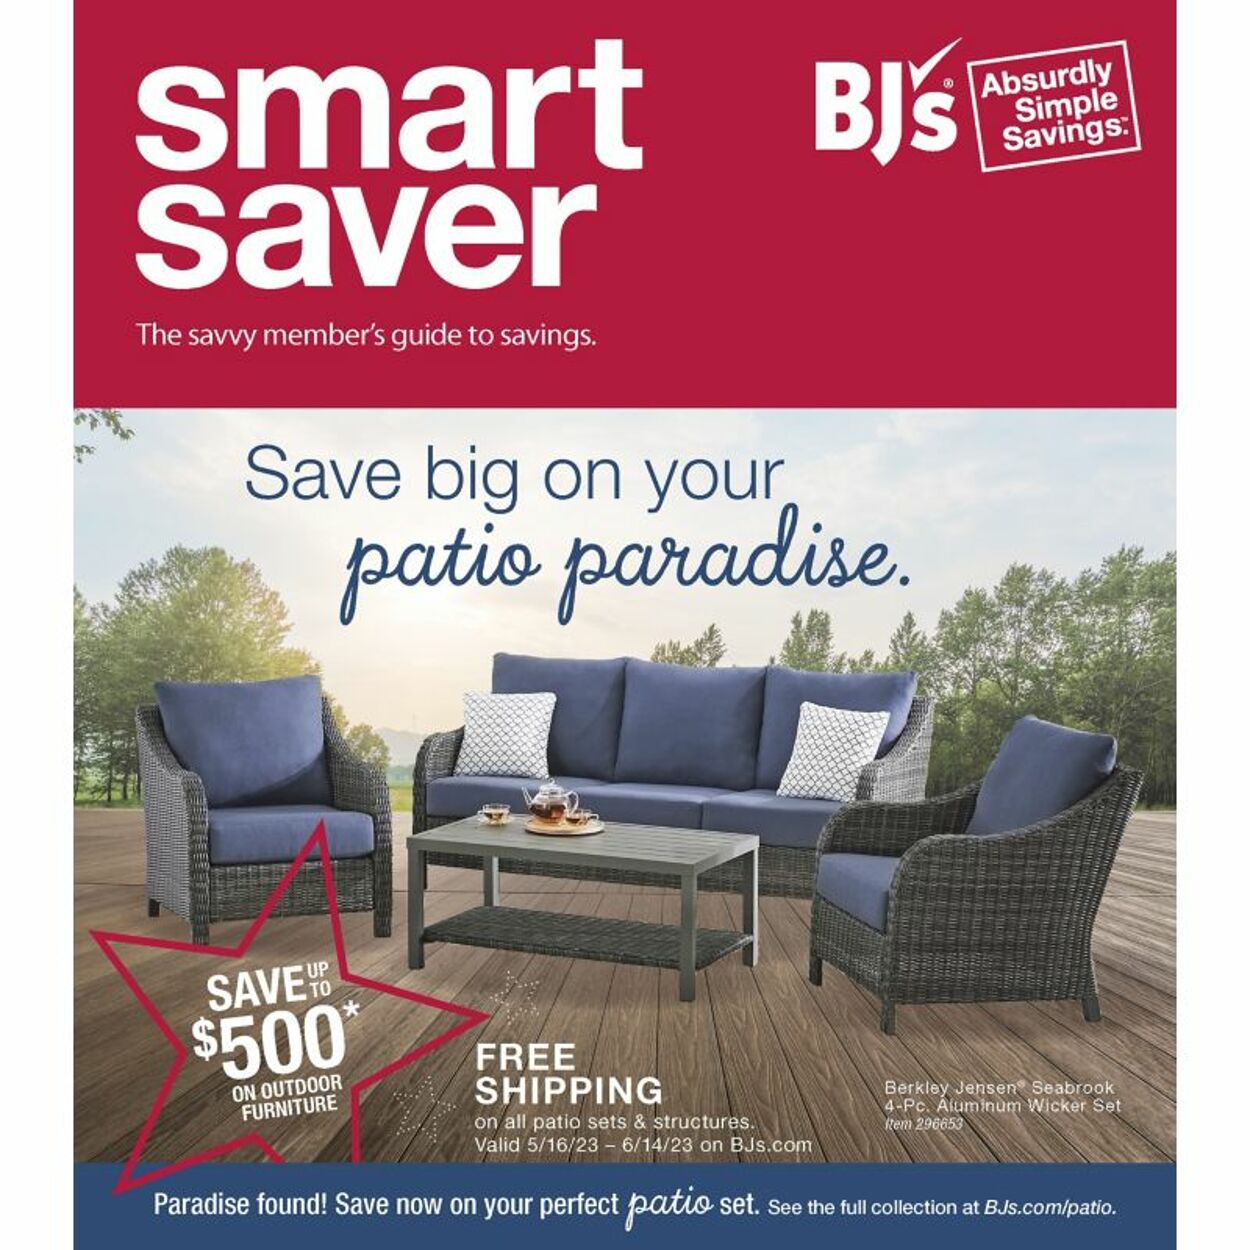 BJ's Promotional weekly ads